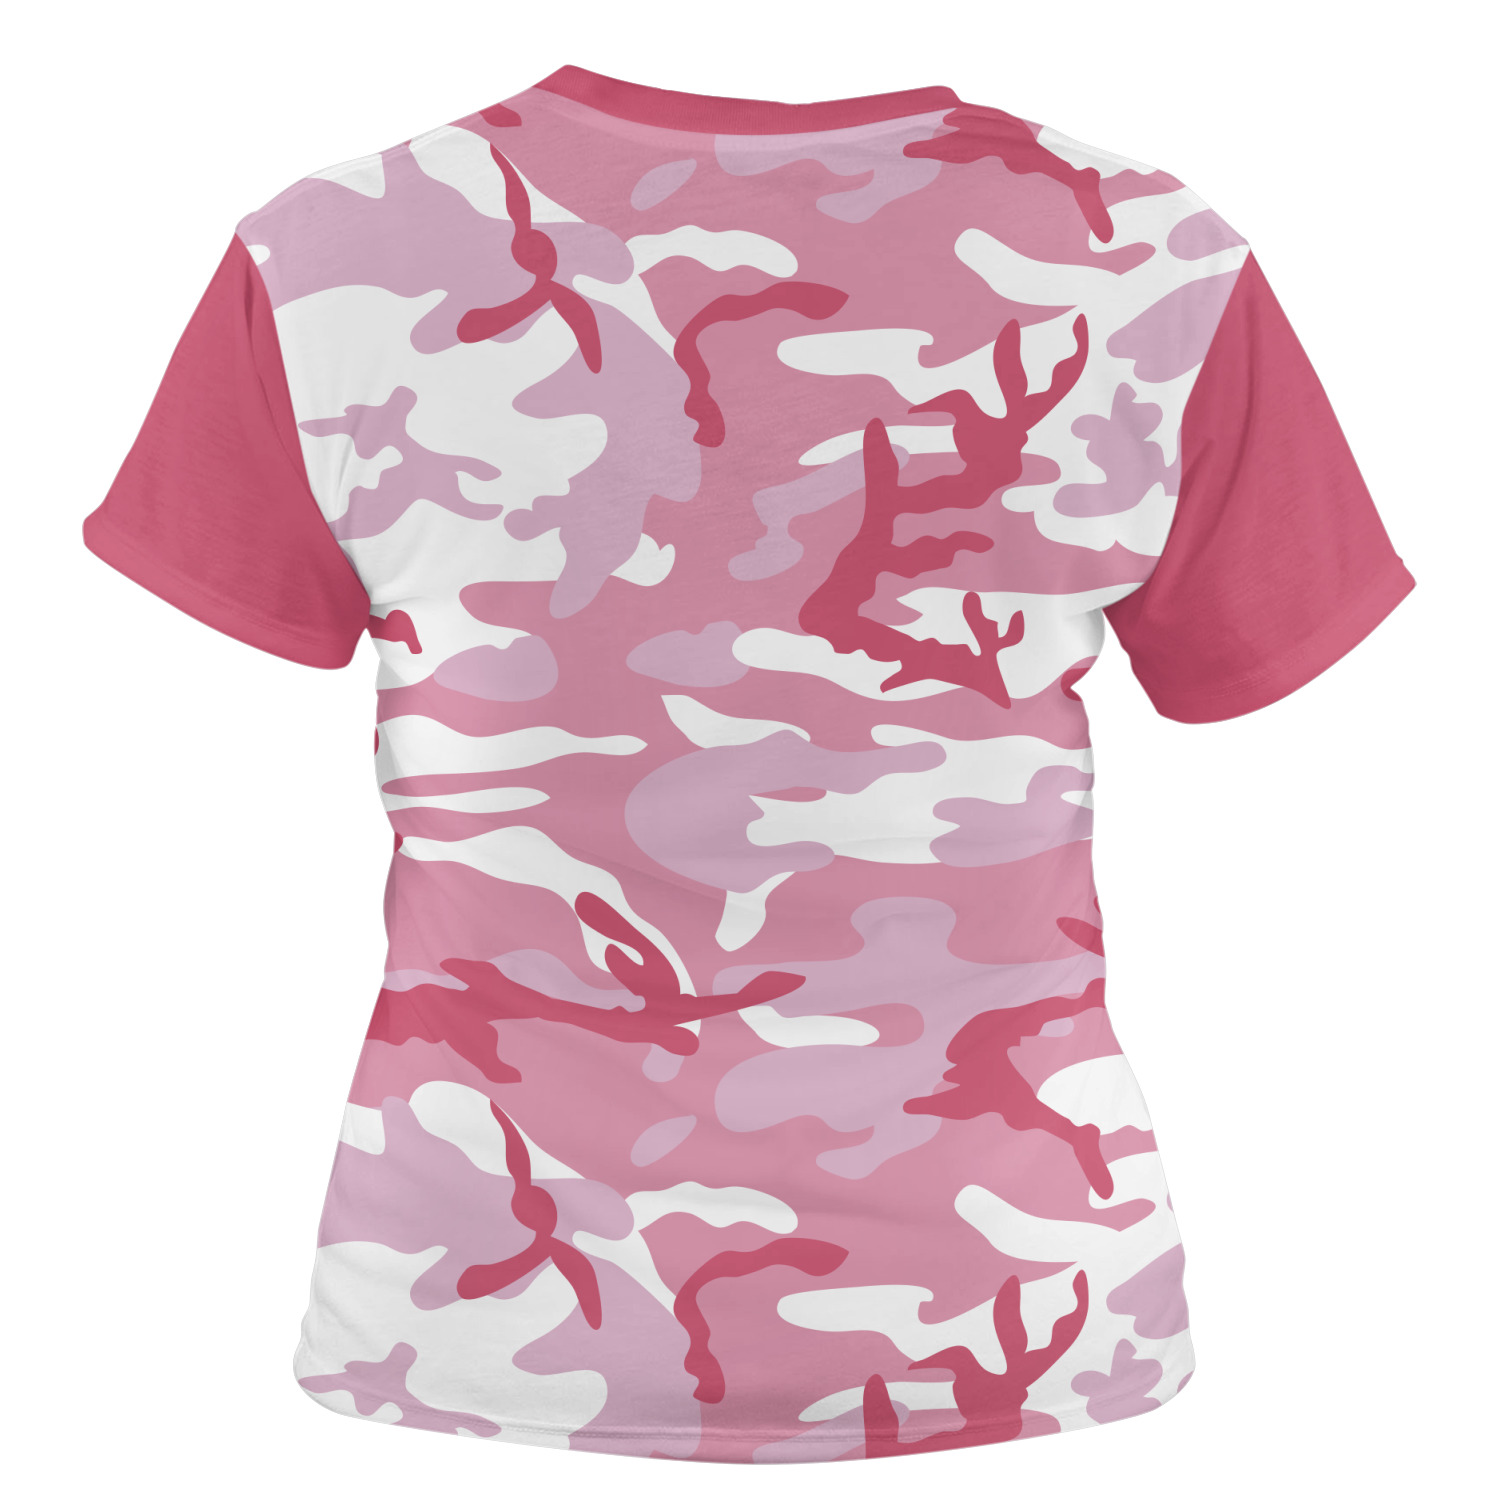 Pink Camo Women's Crew T-Shirt - Large (Personalized) - YouCustomizeIt